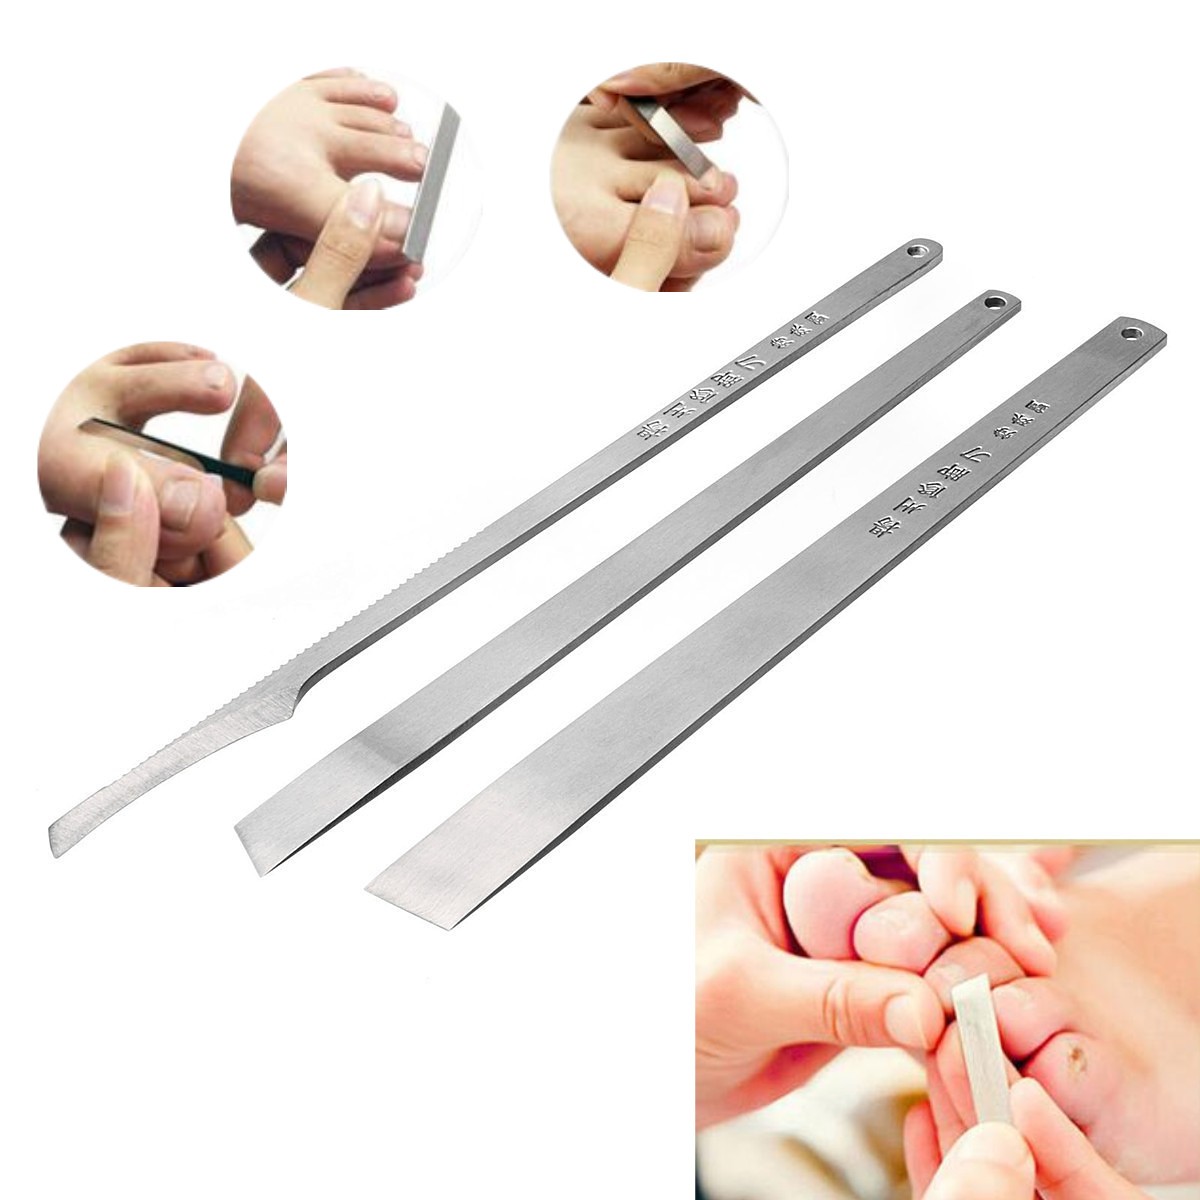 

3pcs Stainless Steel Ingrown Nail Cleaner Cuticle Knife Dead Skin Remover Manicure Pedicure Tool